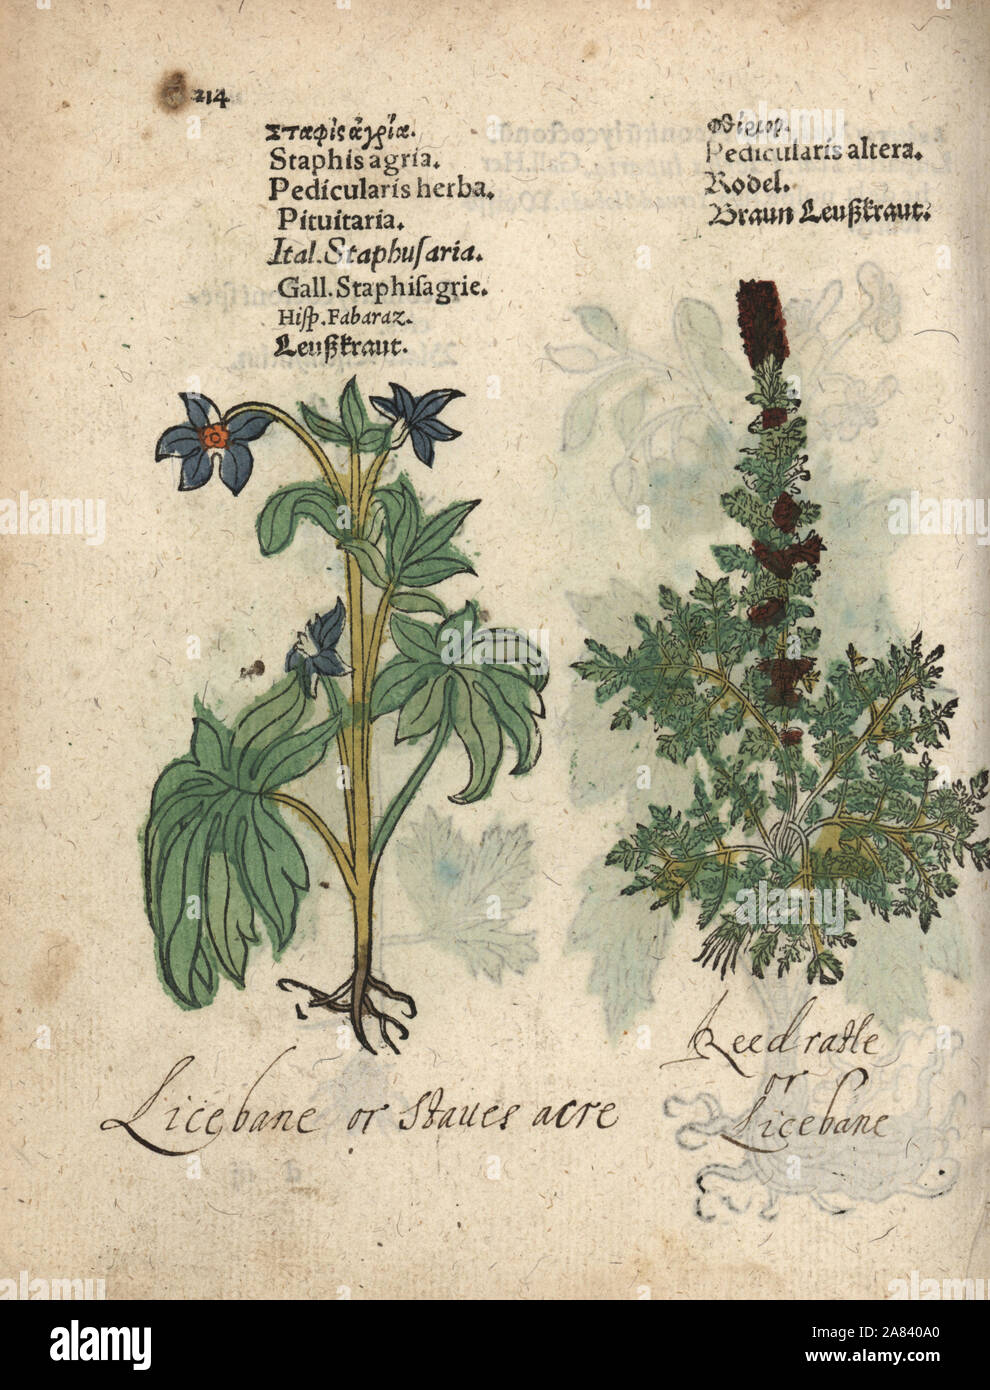 Lice bane, Delphinium staphisagria, and lousewort, Pedicularis sylvatica. Handcoloured woodblock engraving of a botanical illustration from Adam Lonicer's Krauterbuch, or Herbal, Frankfurt, 1557. This from a 17th century pirate edition or atlas of illustrations only, with captions in Latin, Greek, French, Italian, German, and in English manuscript. Stock Photo